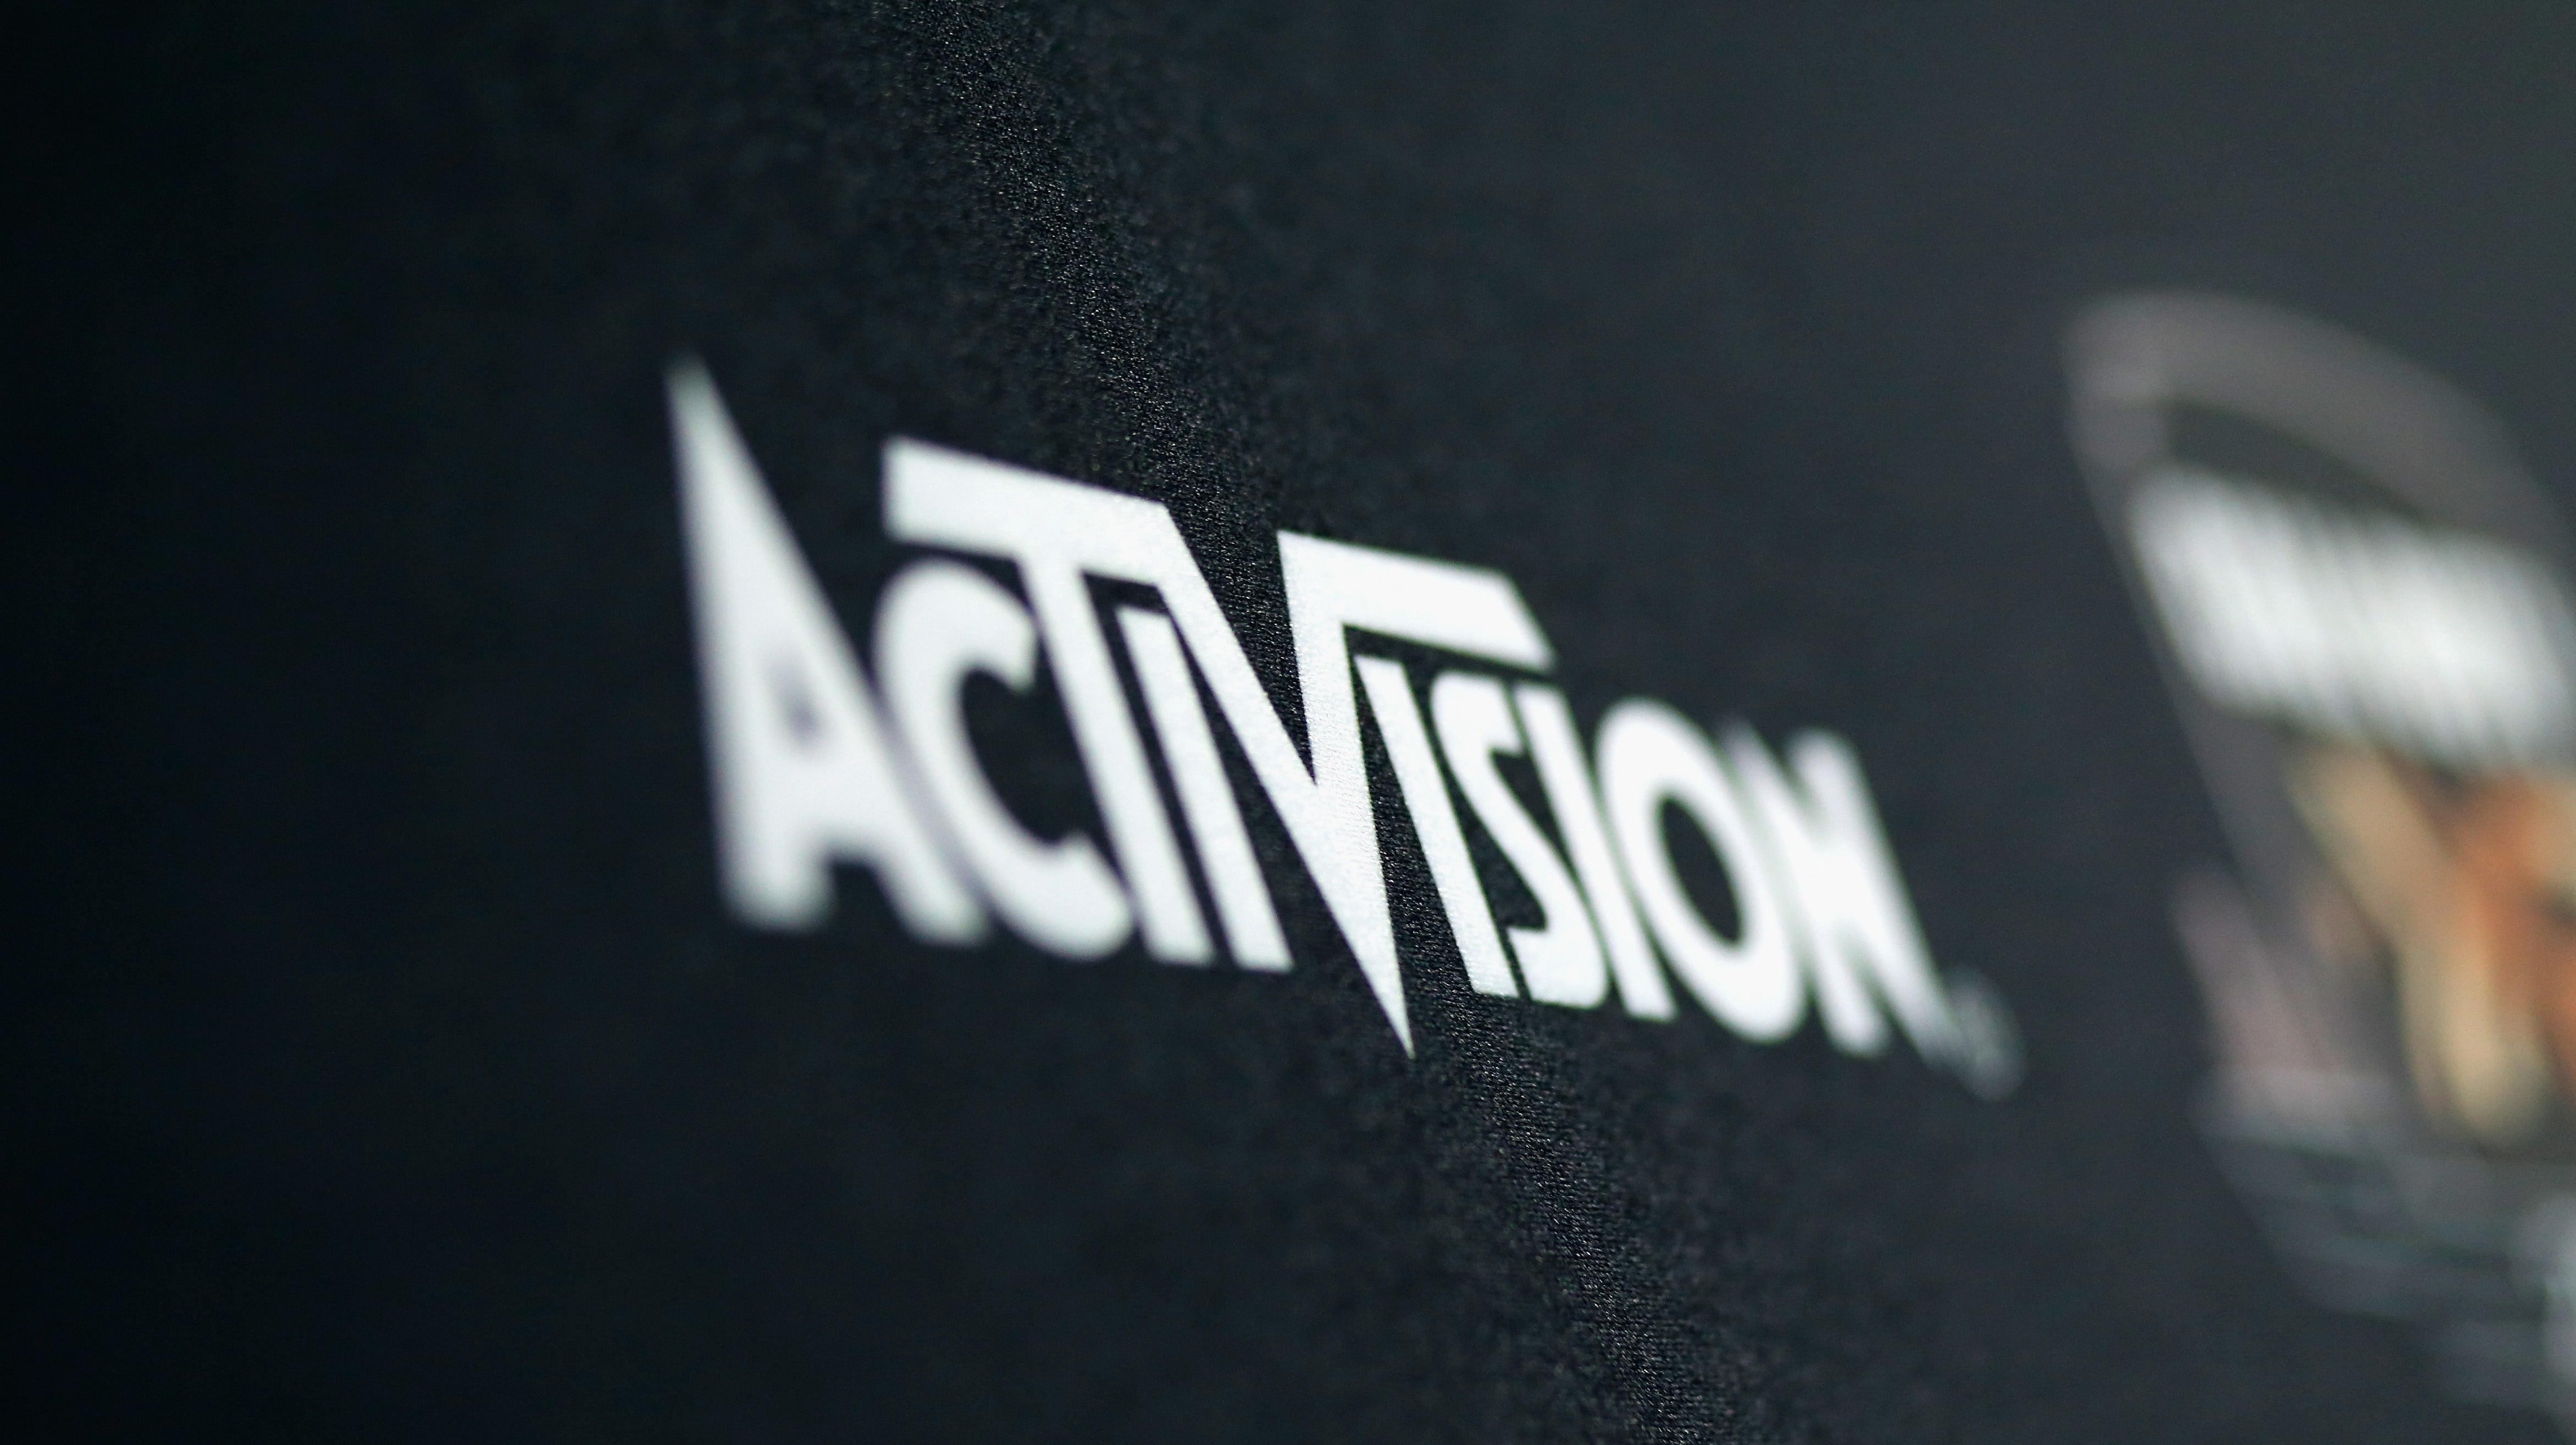 Video game company Activision Blizzard sued for discrimination and fostering a “frat boy culture”